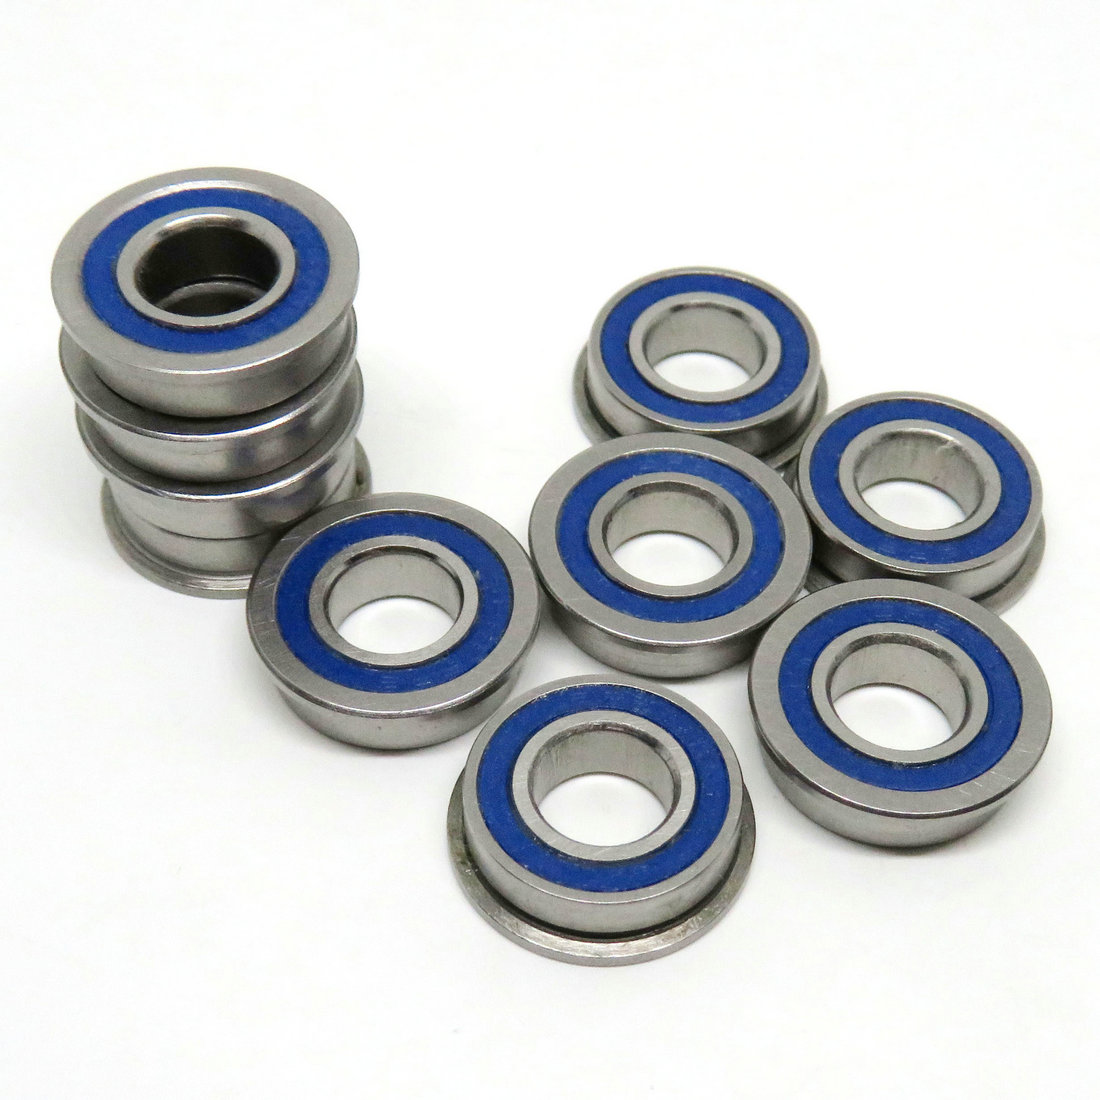 Zoty Stainless Steel Flanged Bearings